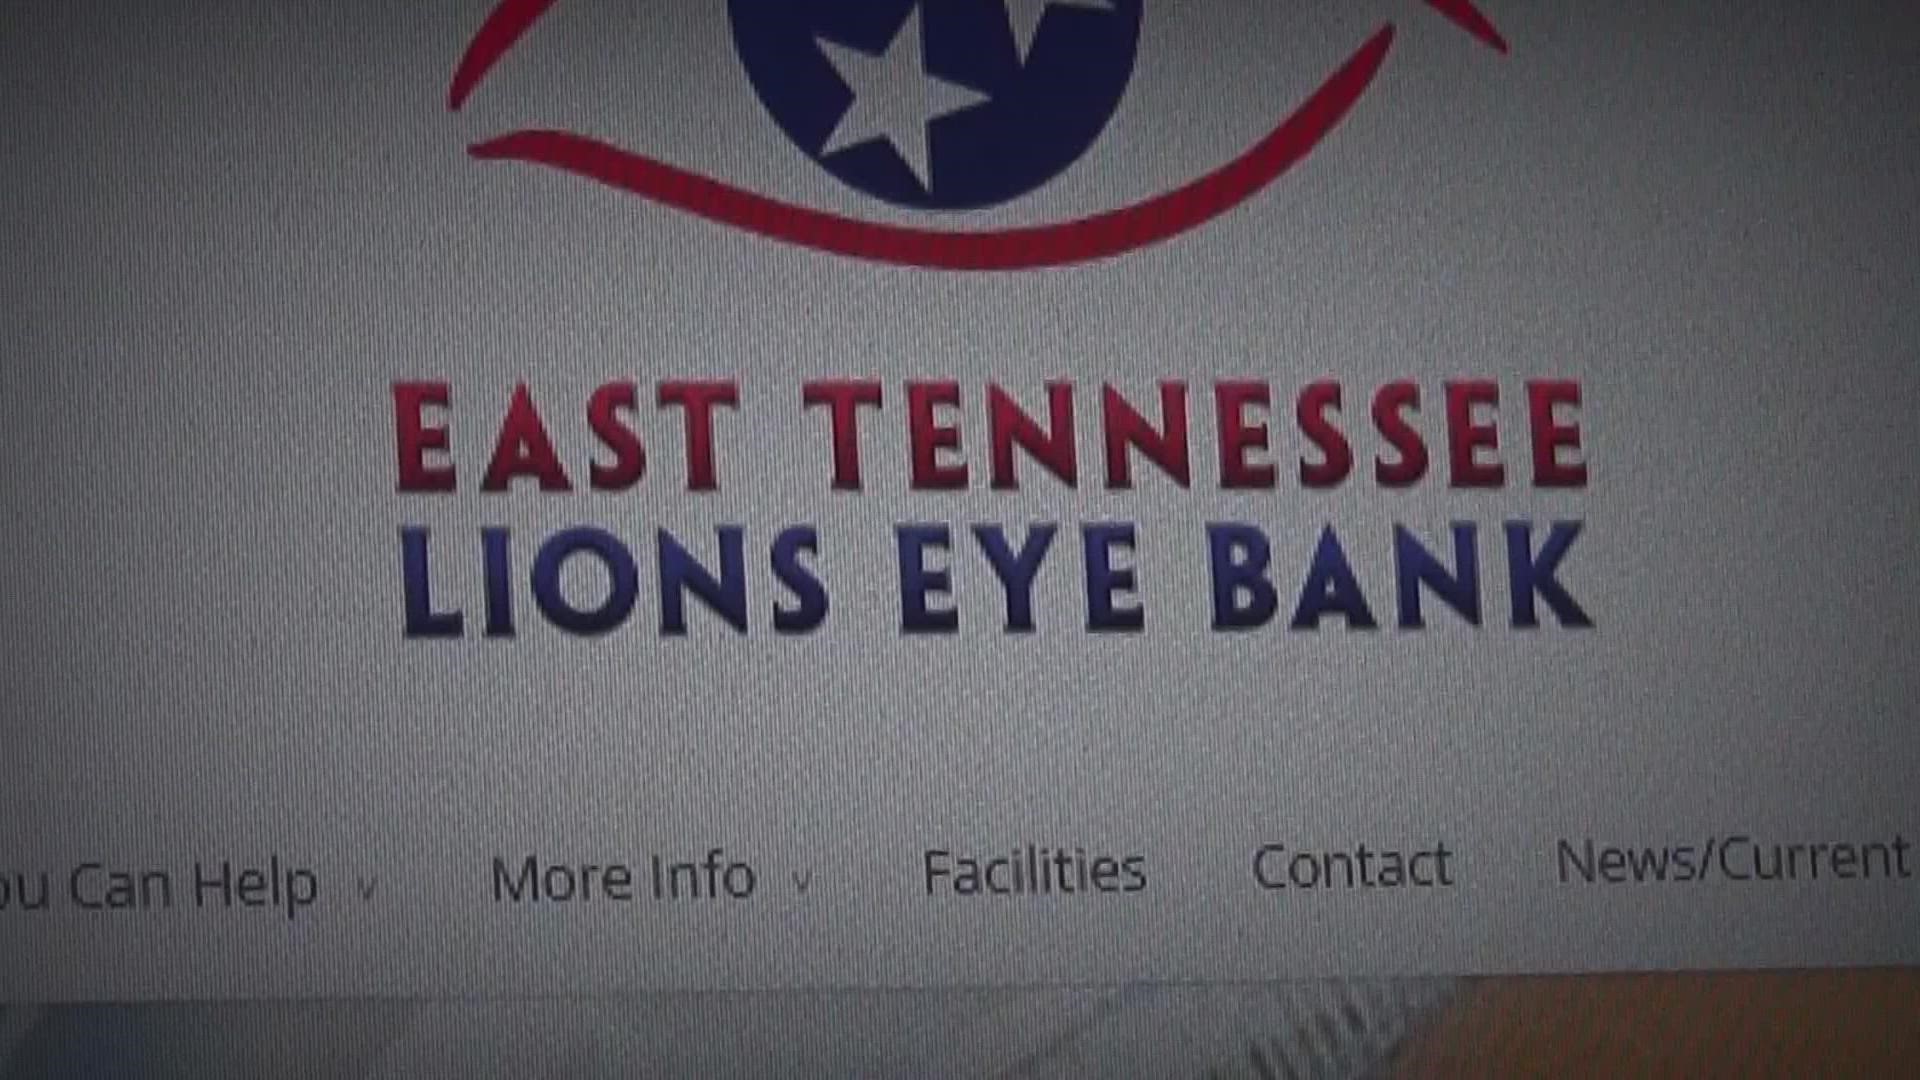 The East Tennessee Lions Eye Bank now says it mistakenly reported an office manager as a part-time employee to the IRS.